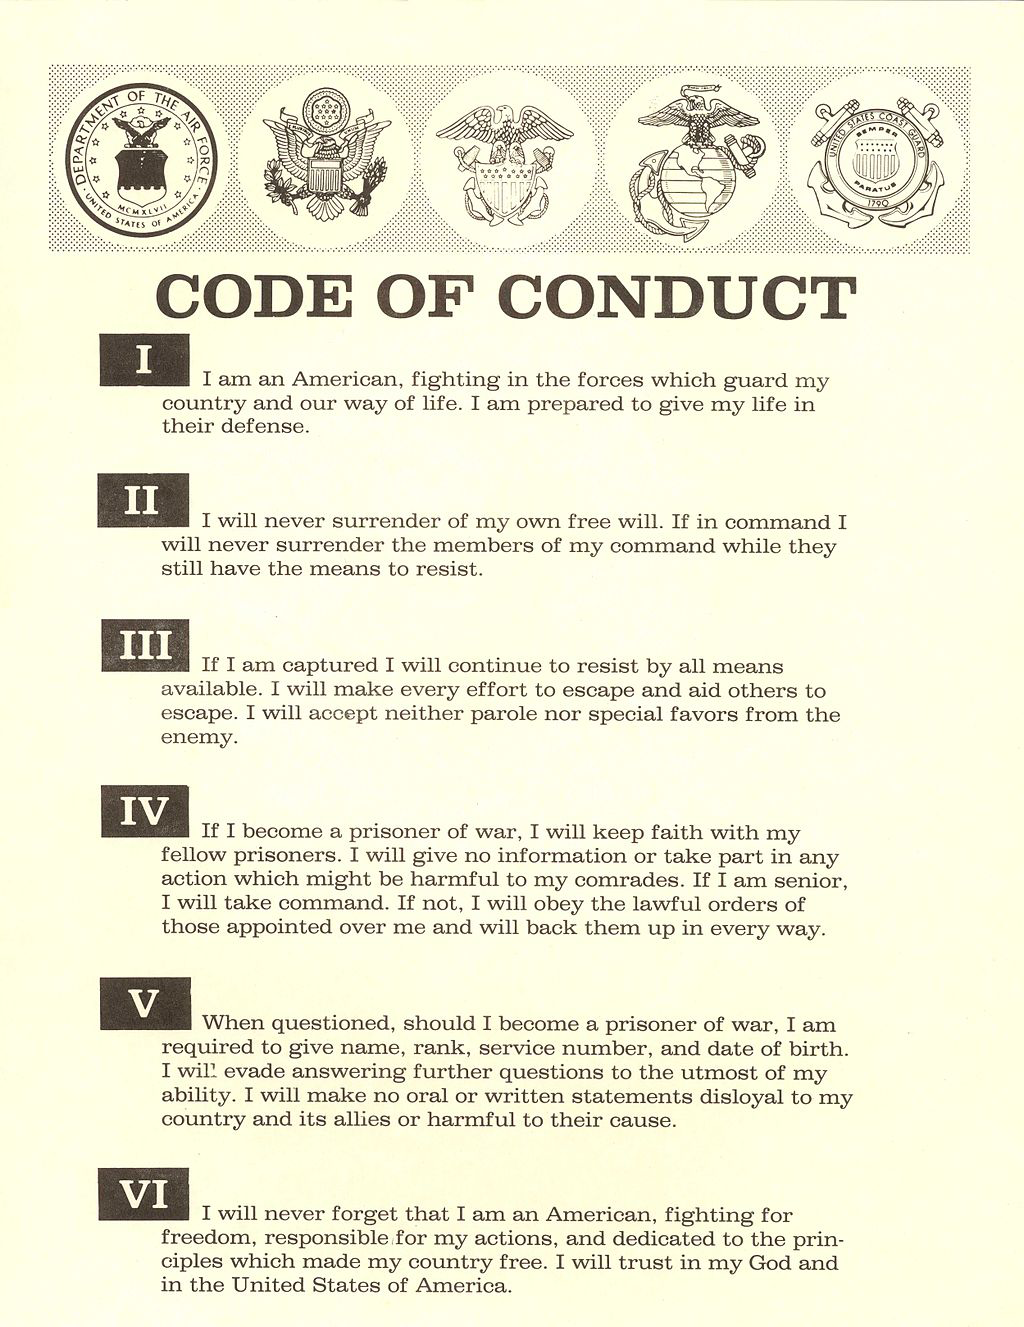 The United States Military Code of Conduct